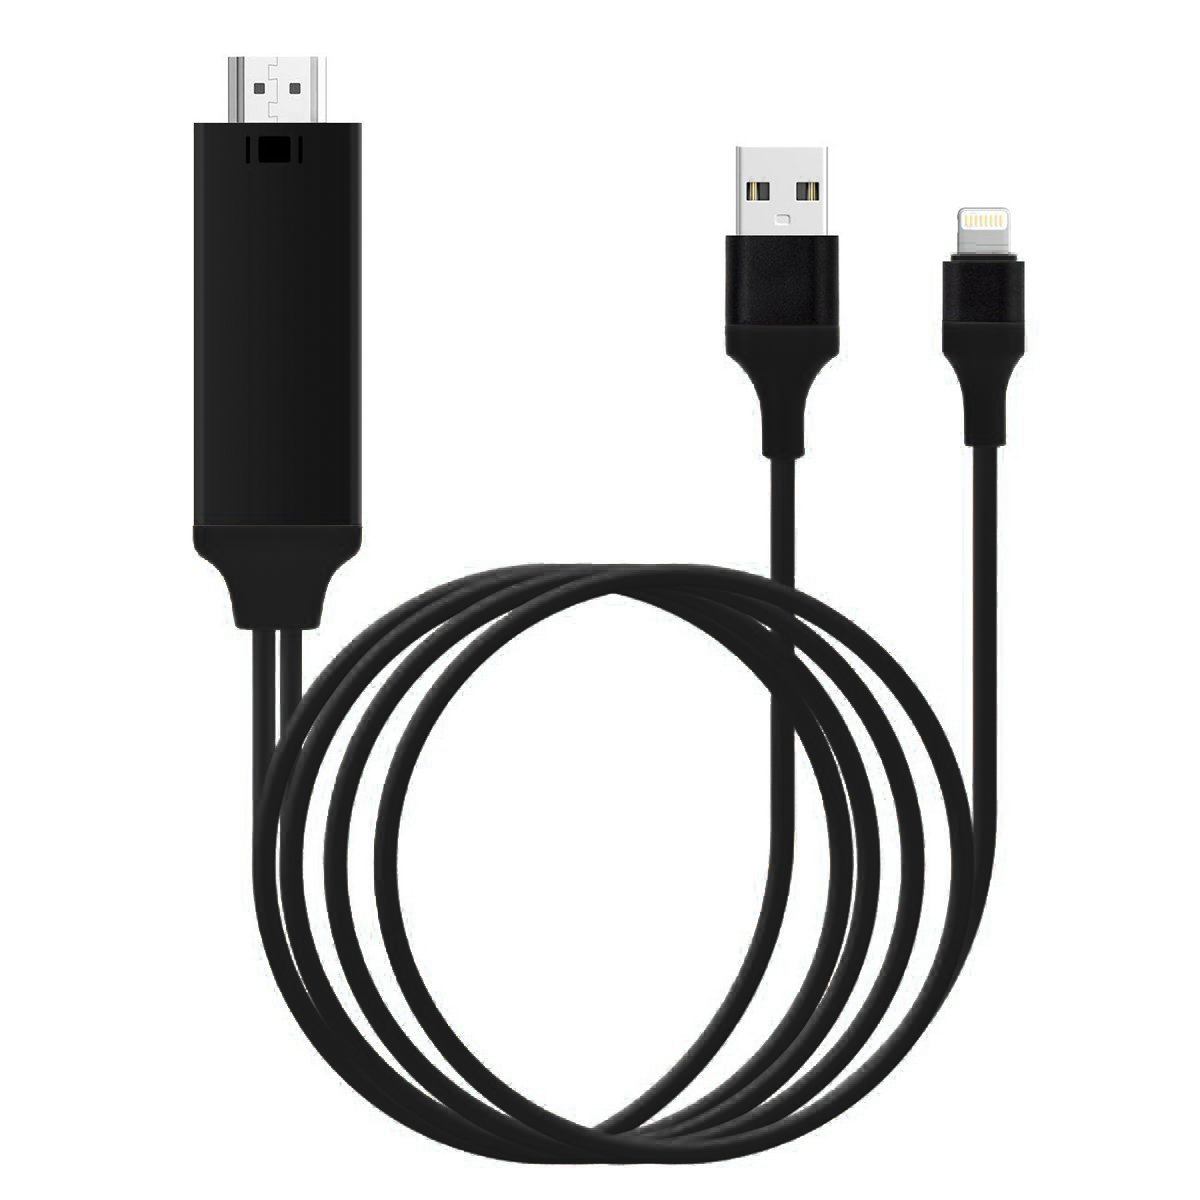 Find iP Port/USB to 4K HD Display Port Cable for iPhone/for iPad/for iPod Audio/Video/Files Transfer to Display/Projector/TV with HDMI Port for Sale on Gipsybee.com with cryptocurrencies